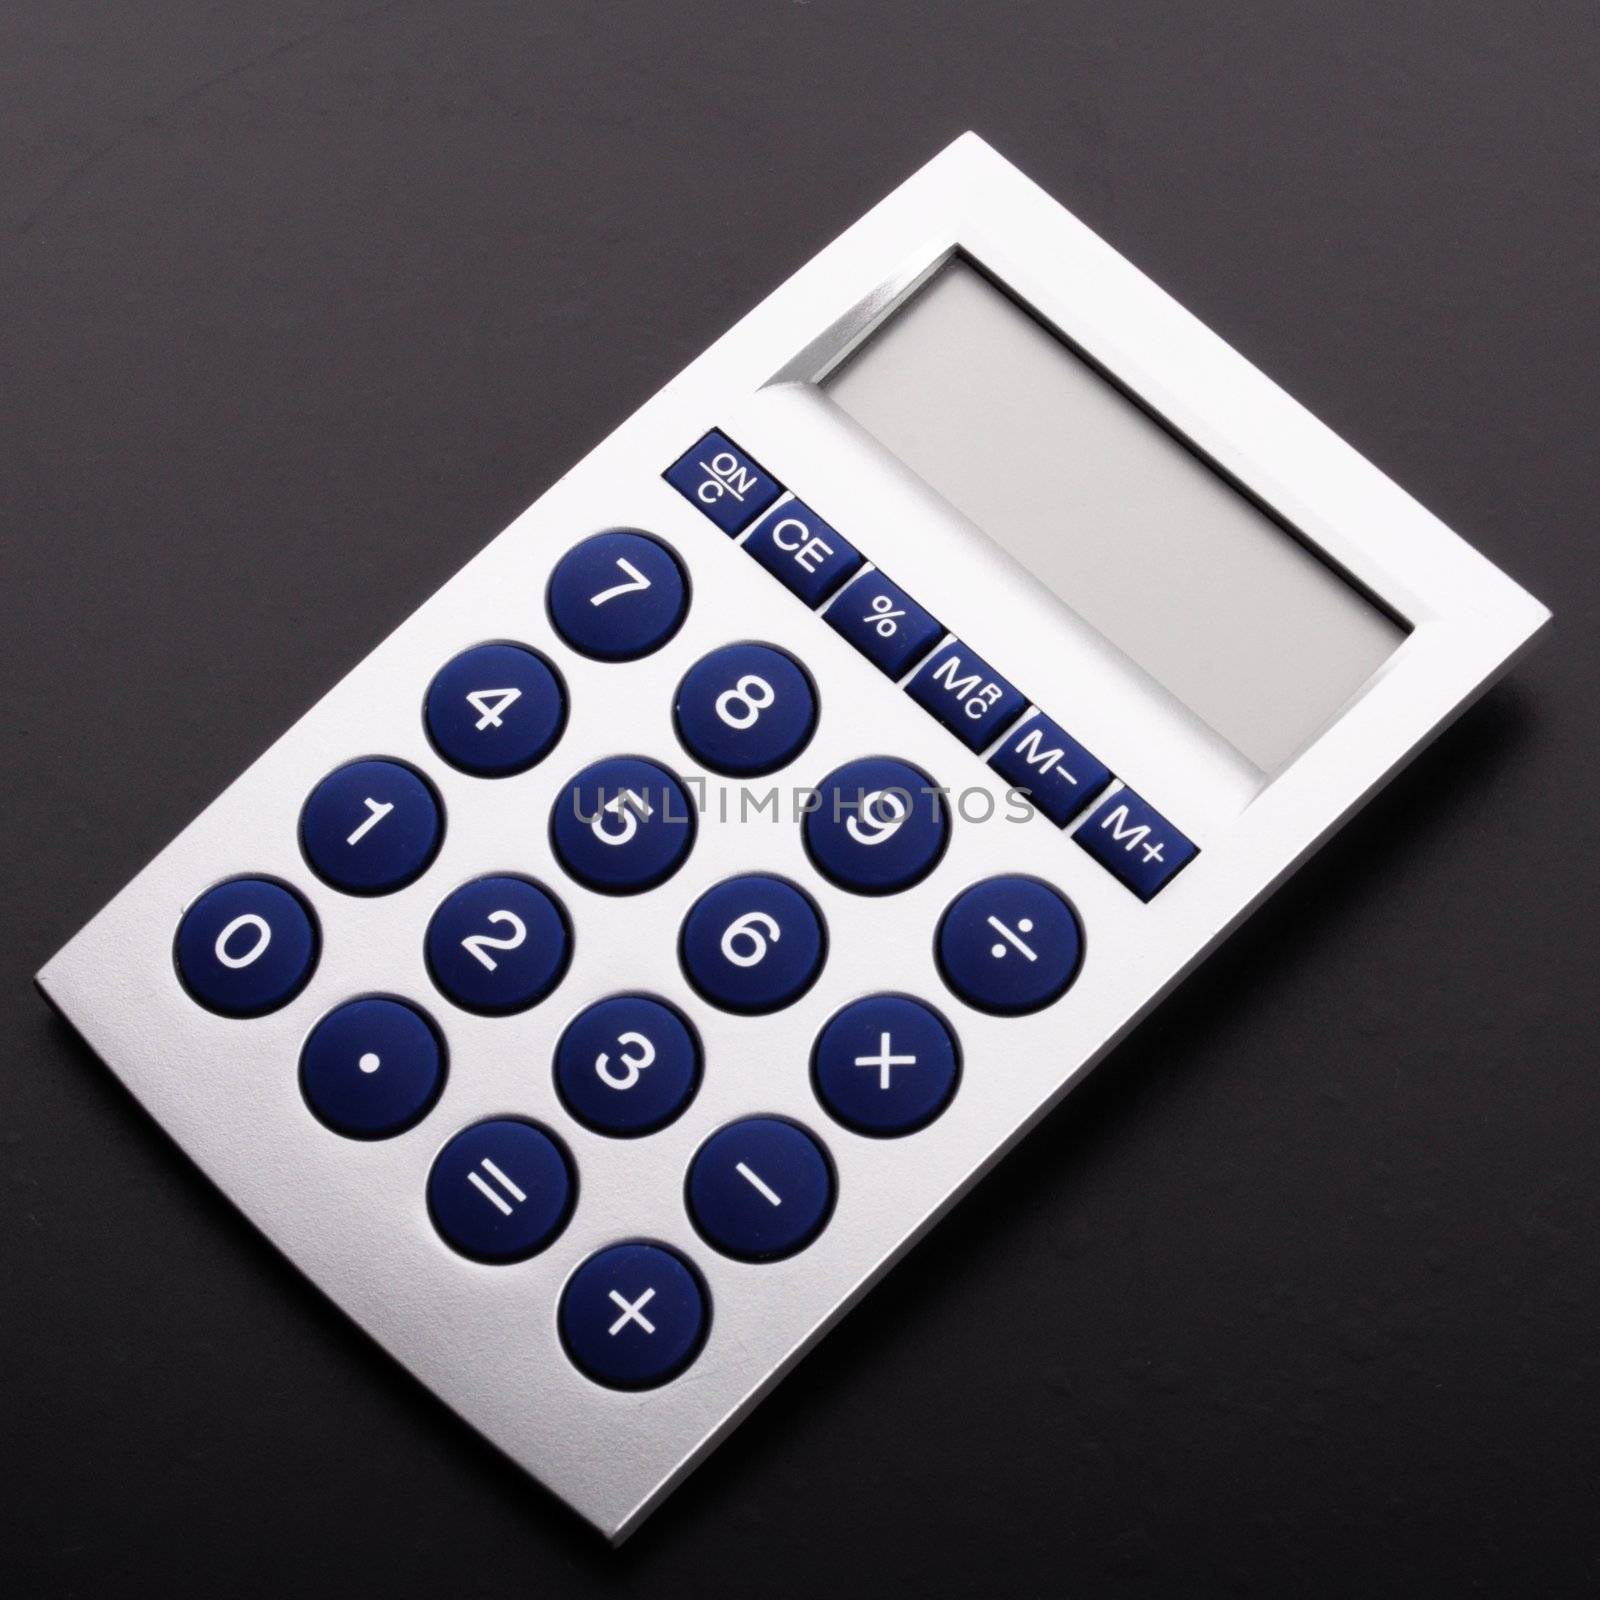 calculator with blank and empty copyspace display